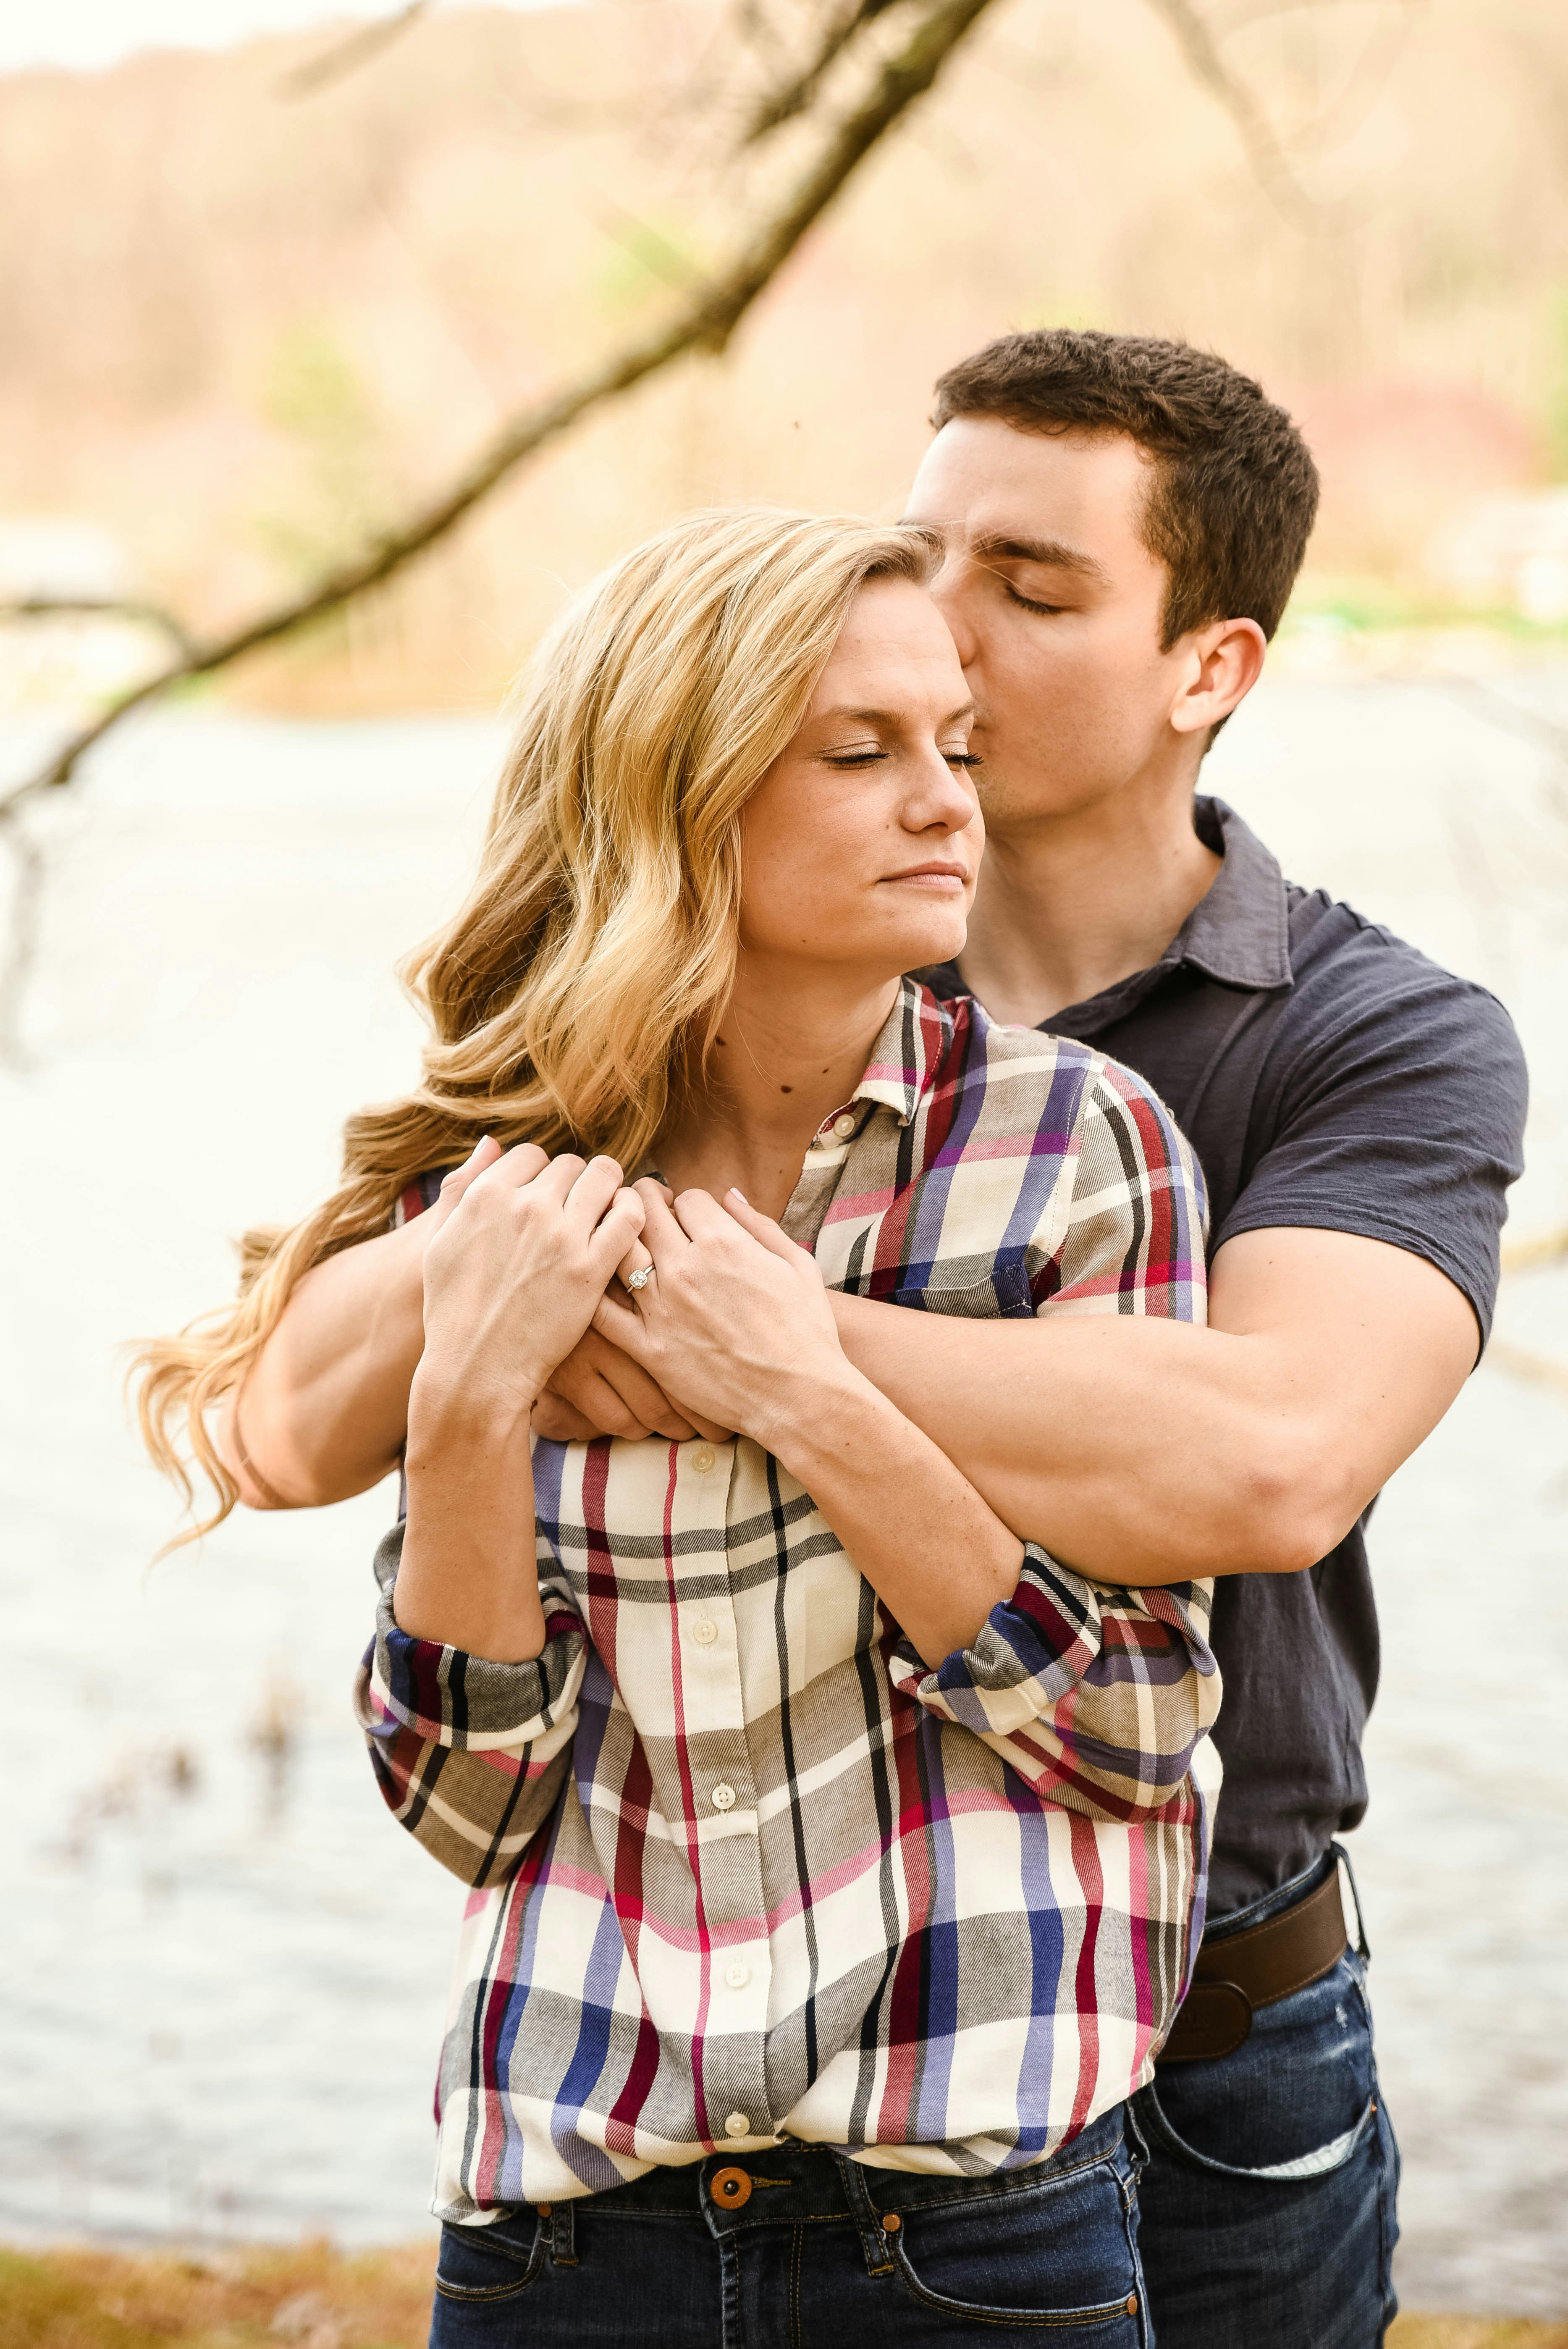 great photo recipe,how to photograph couple by a lake.; man in blue crew neck t-shirt kissing woman in plaid shirt